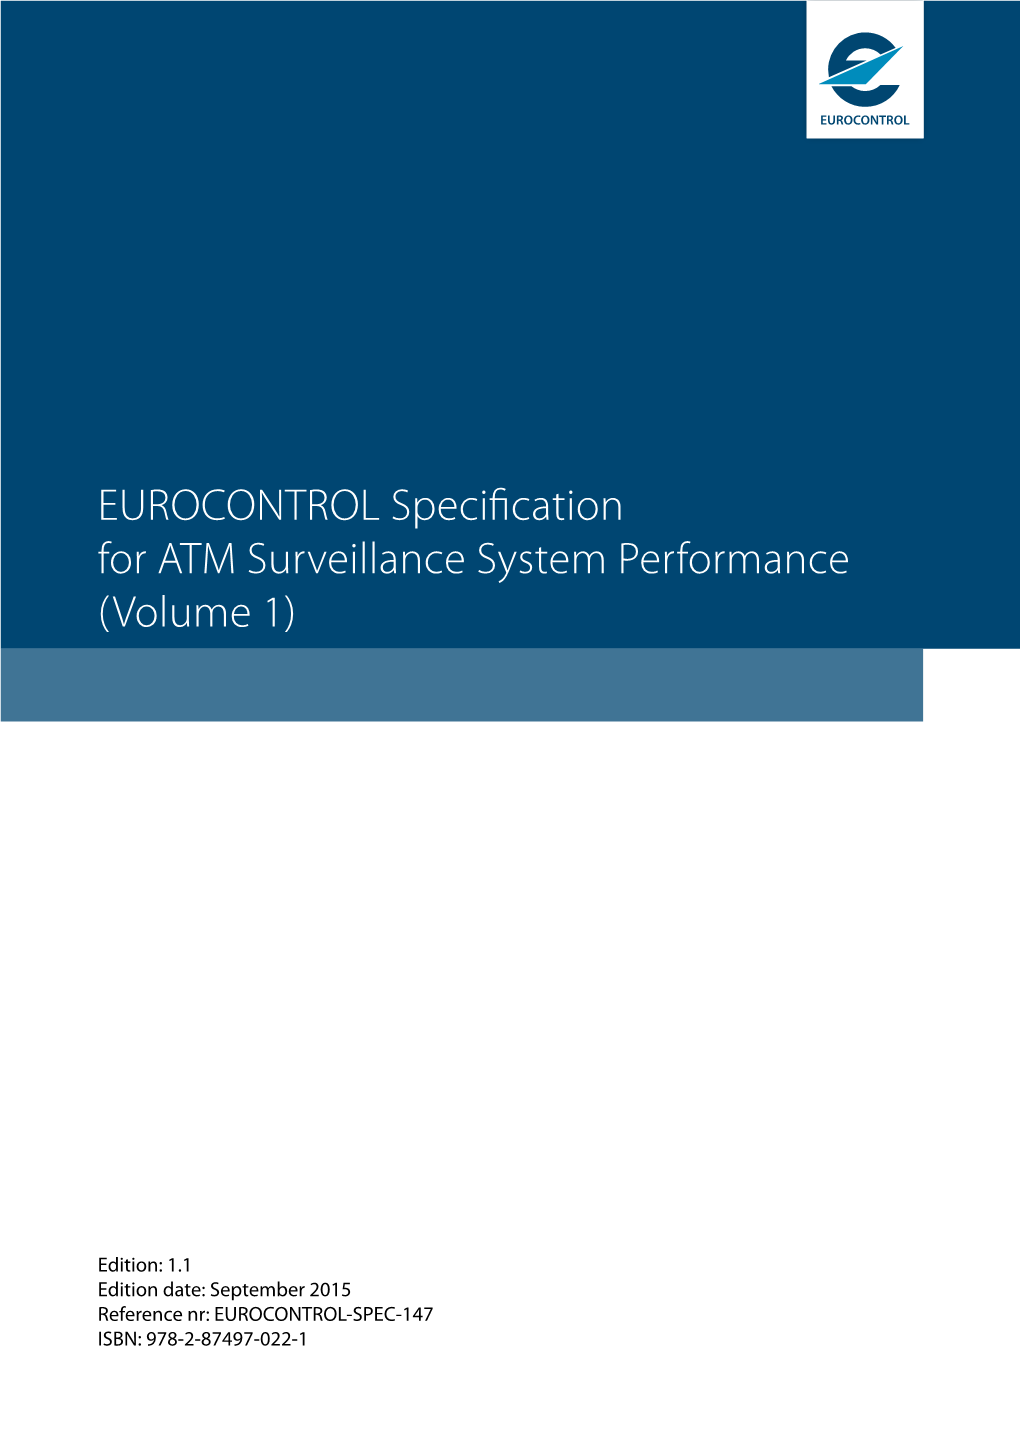 EUROCONTROL Specification for ATM Surveillance System Performance (Volume 1)